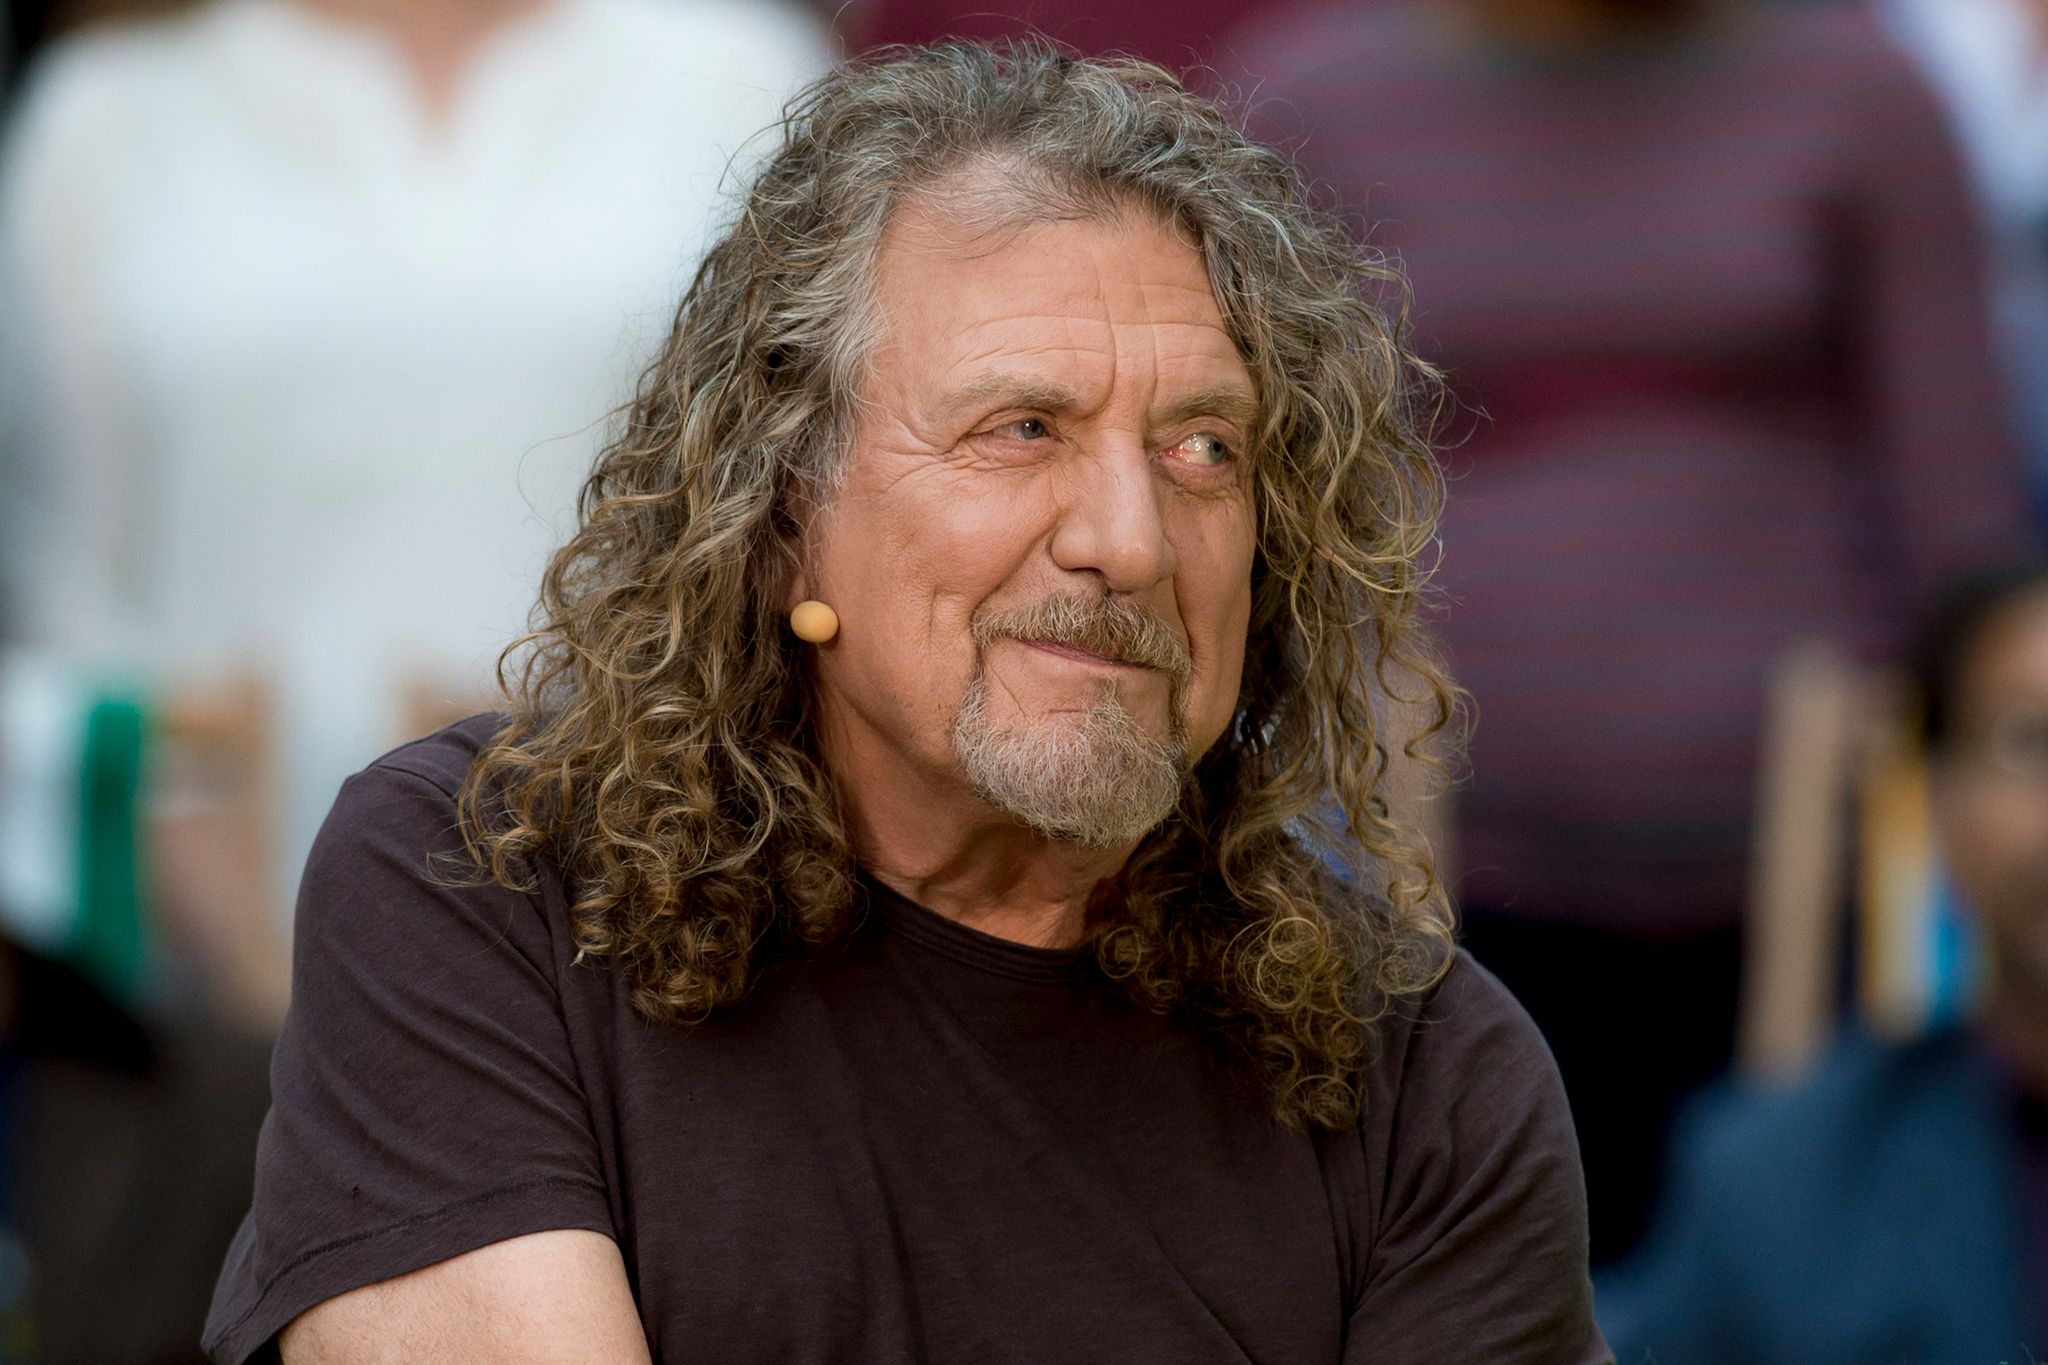 Robert Plant at "One Show" at the BBC Broadcasting House on September 5, 2014, in London, United Kingdom | Source: Getty Images